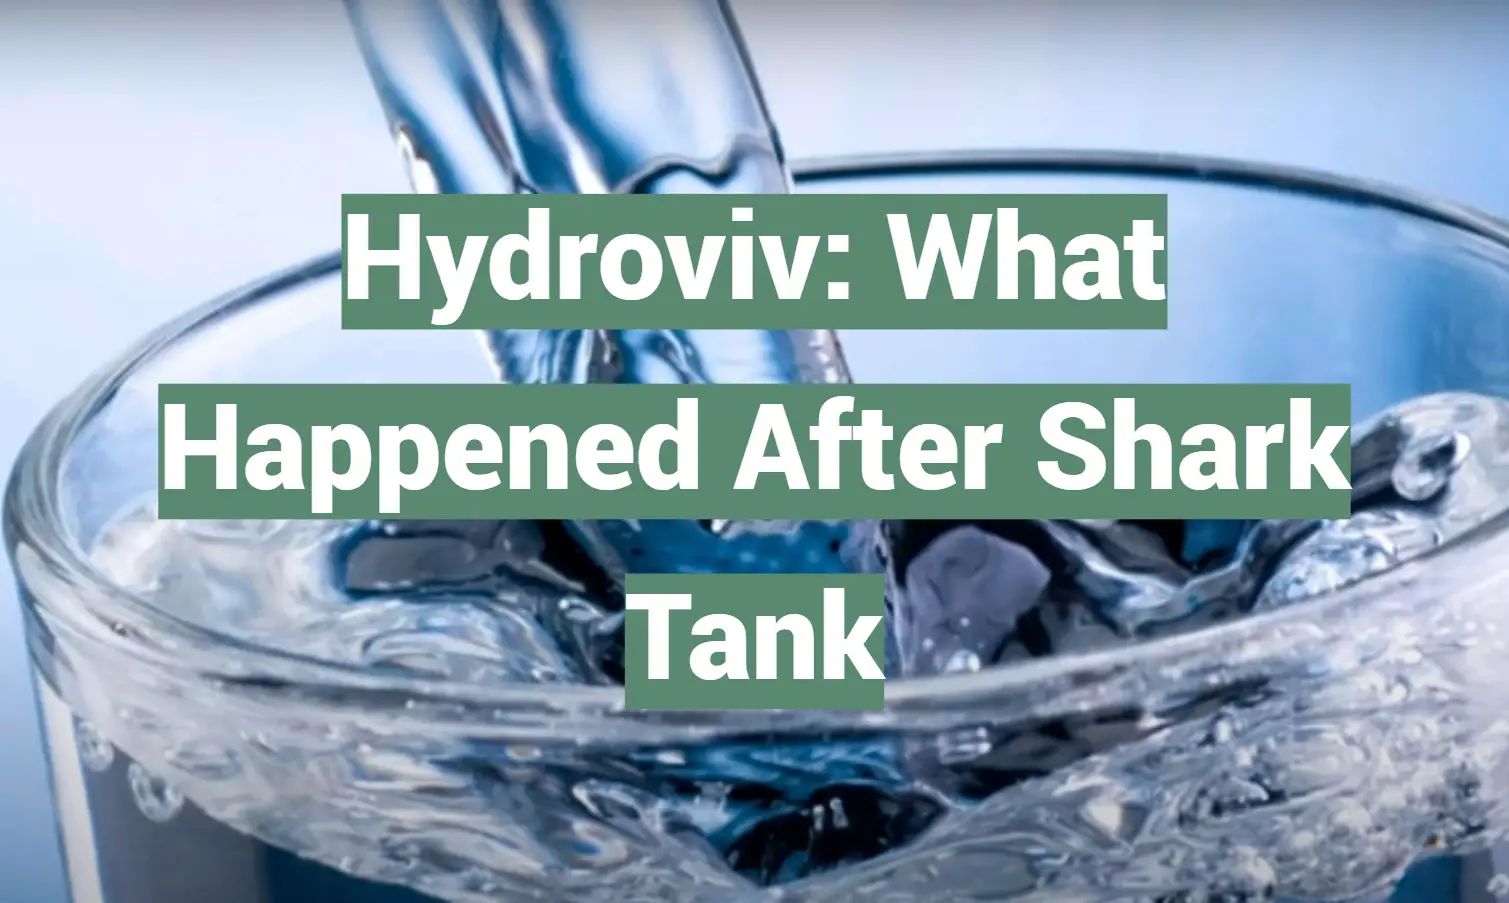 Hydroviv: What Happened After Shark Tank